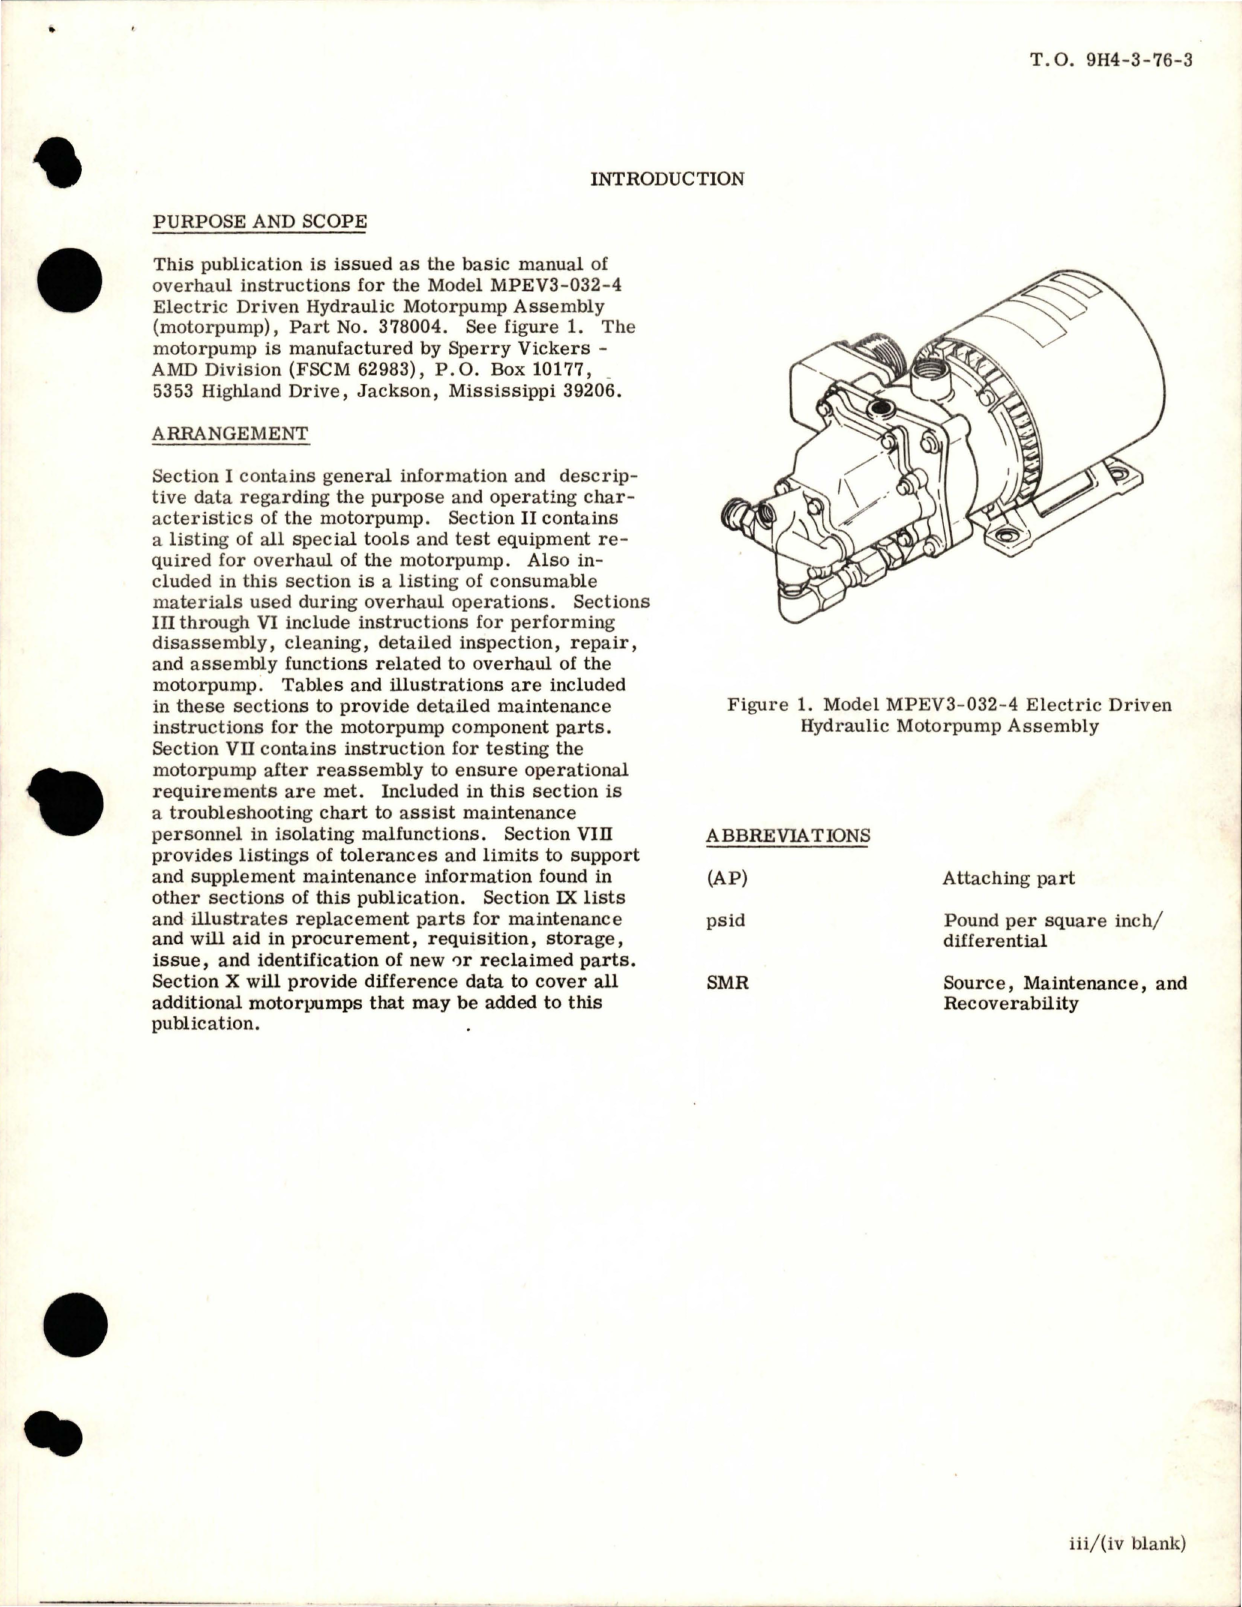 Sample page 7 from AirCorps Library document: Overhaul Instructions with Illustrated Parts for Electric Driven Hydraulic Motorpump Assembly - Part 378004 - Model MPEV3-032-4